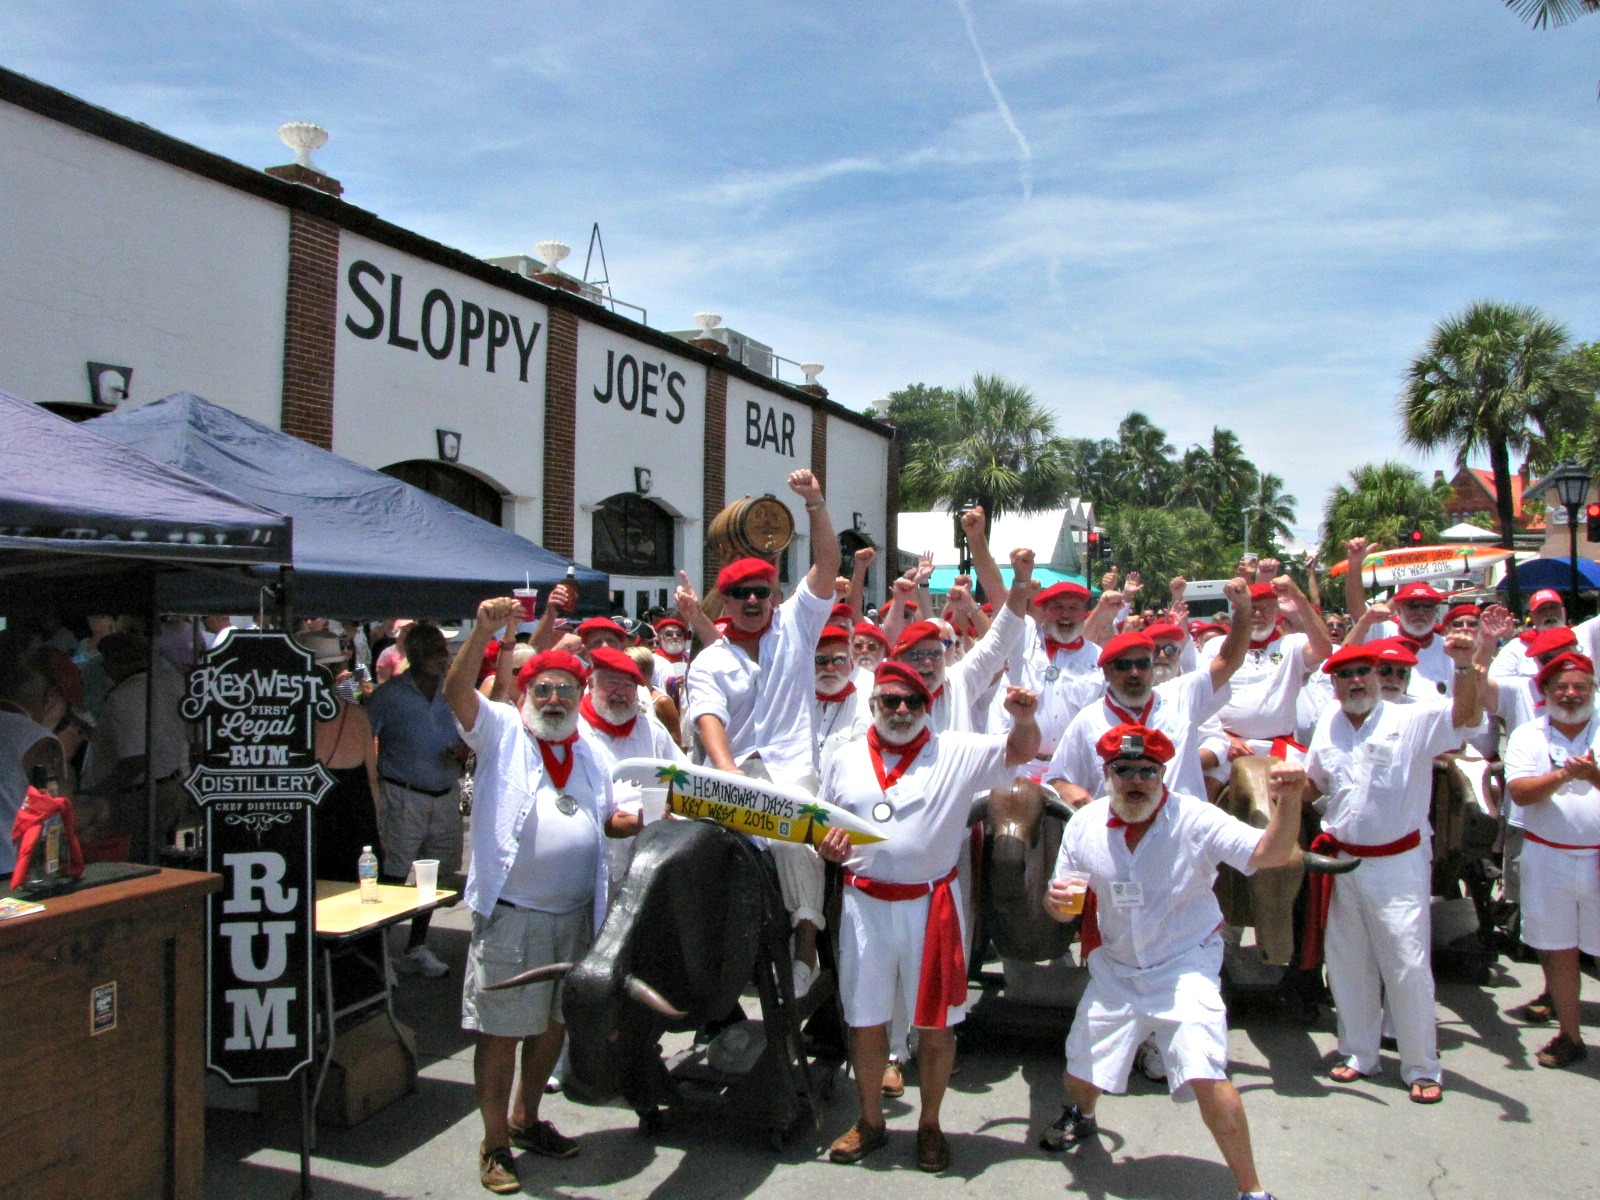 Hemingway look-alikes run with the "bulls" outside Sloppy Joe's Bar in Key West during Hemingway Days; 2017 Hemingway Days is scheduled for mid-July.